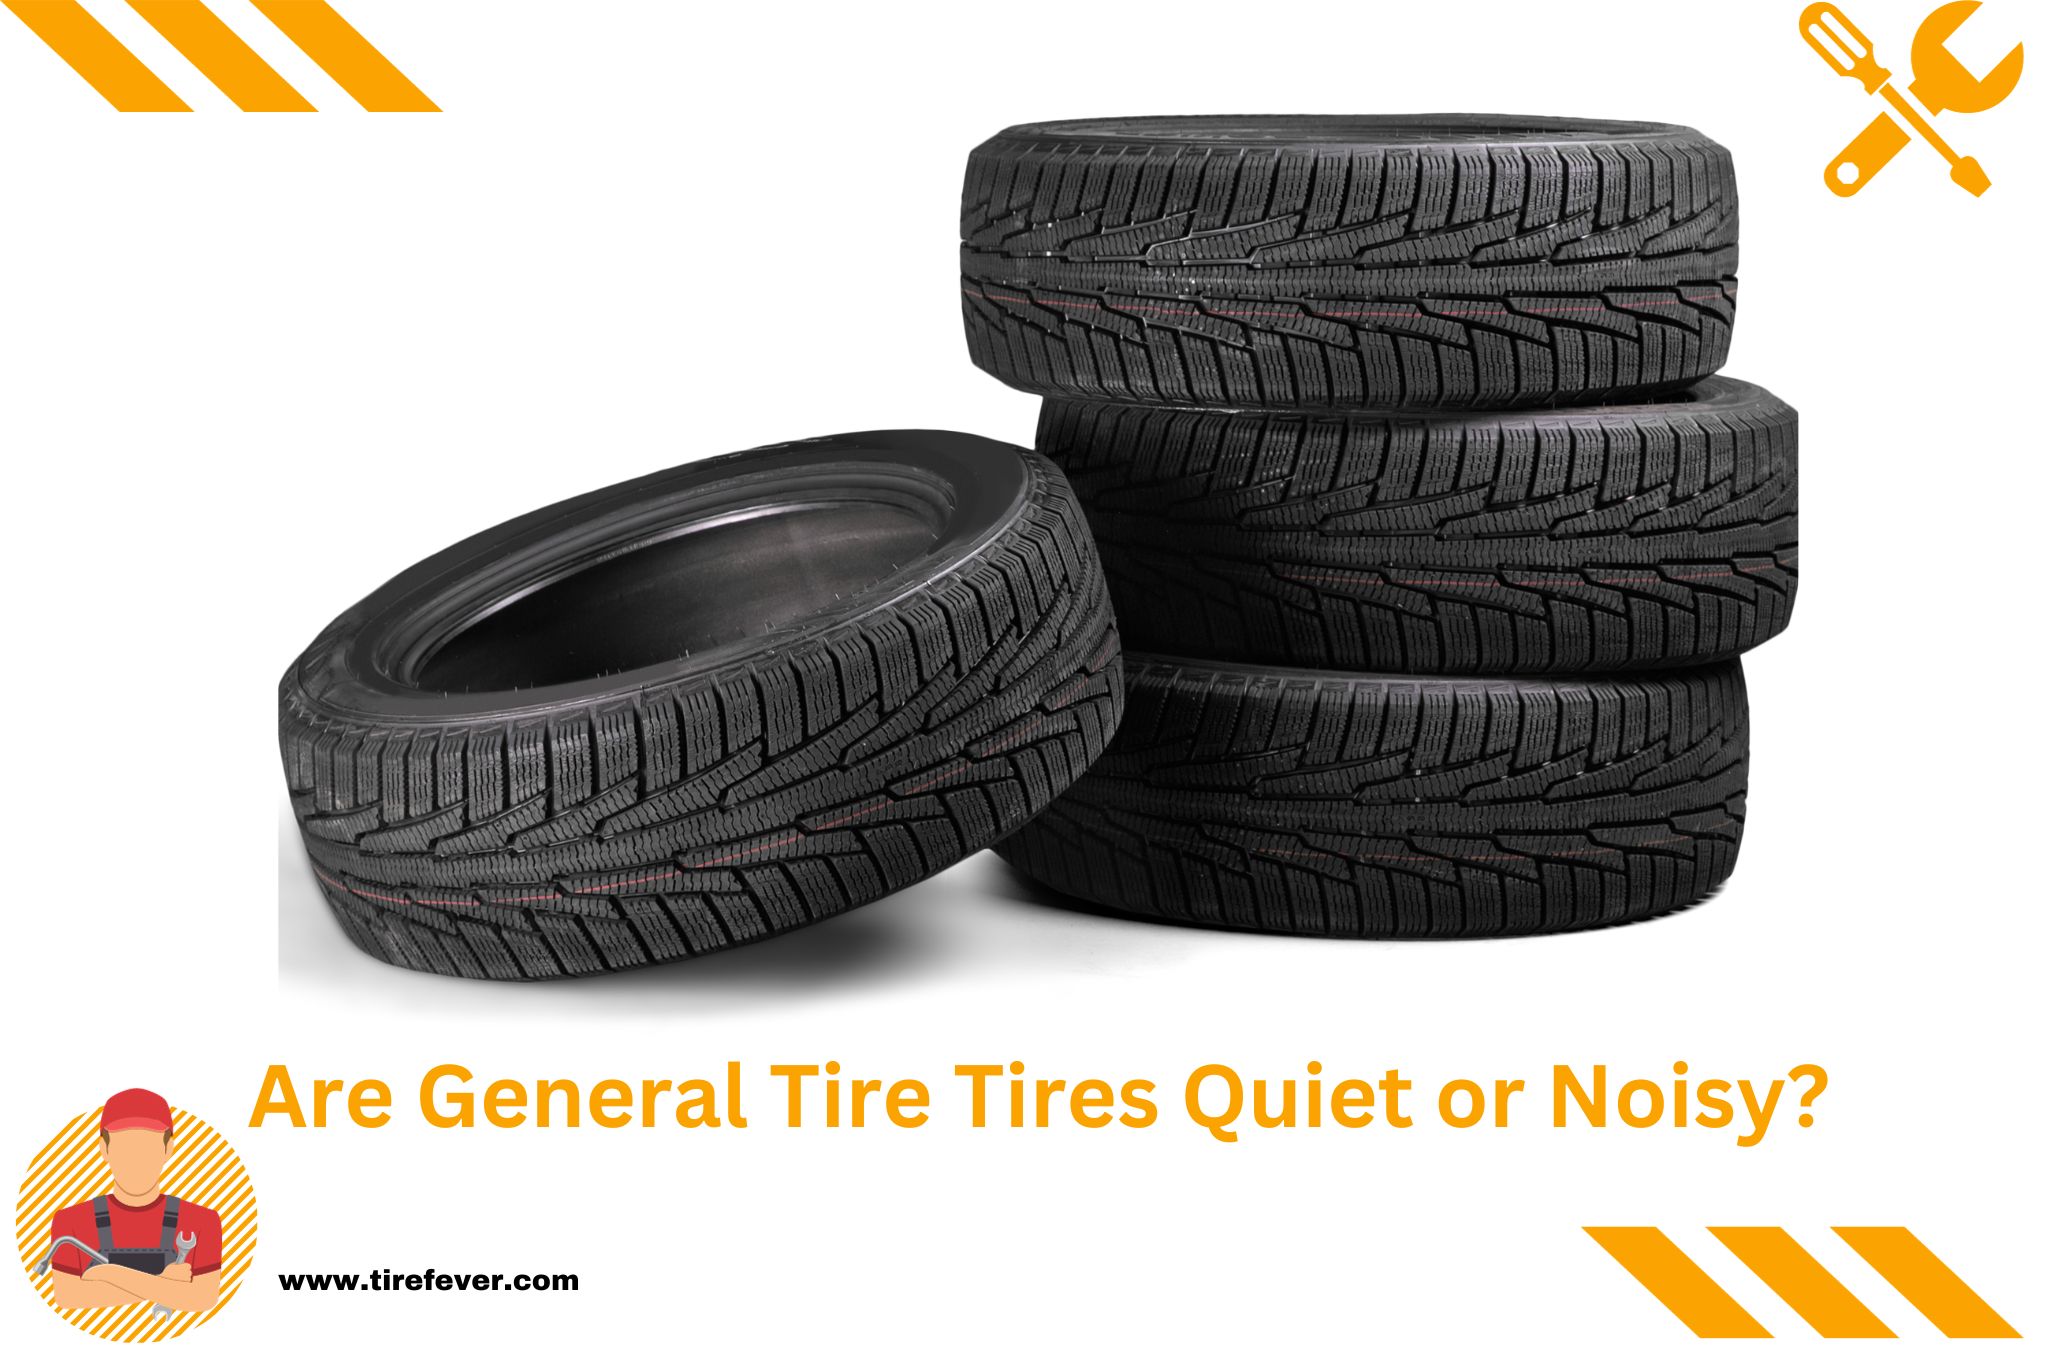 Are General Tire Tires Quiet or Noisy?